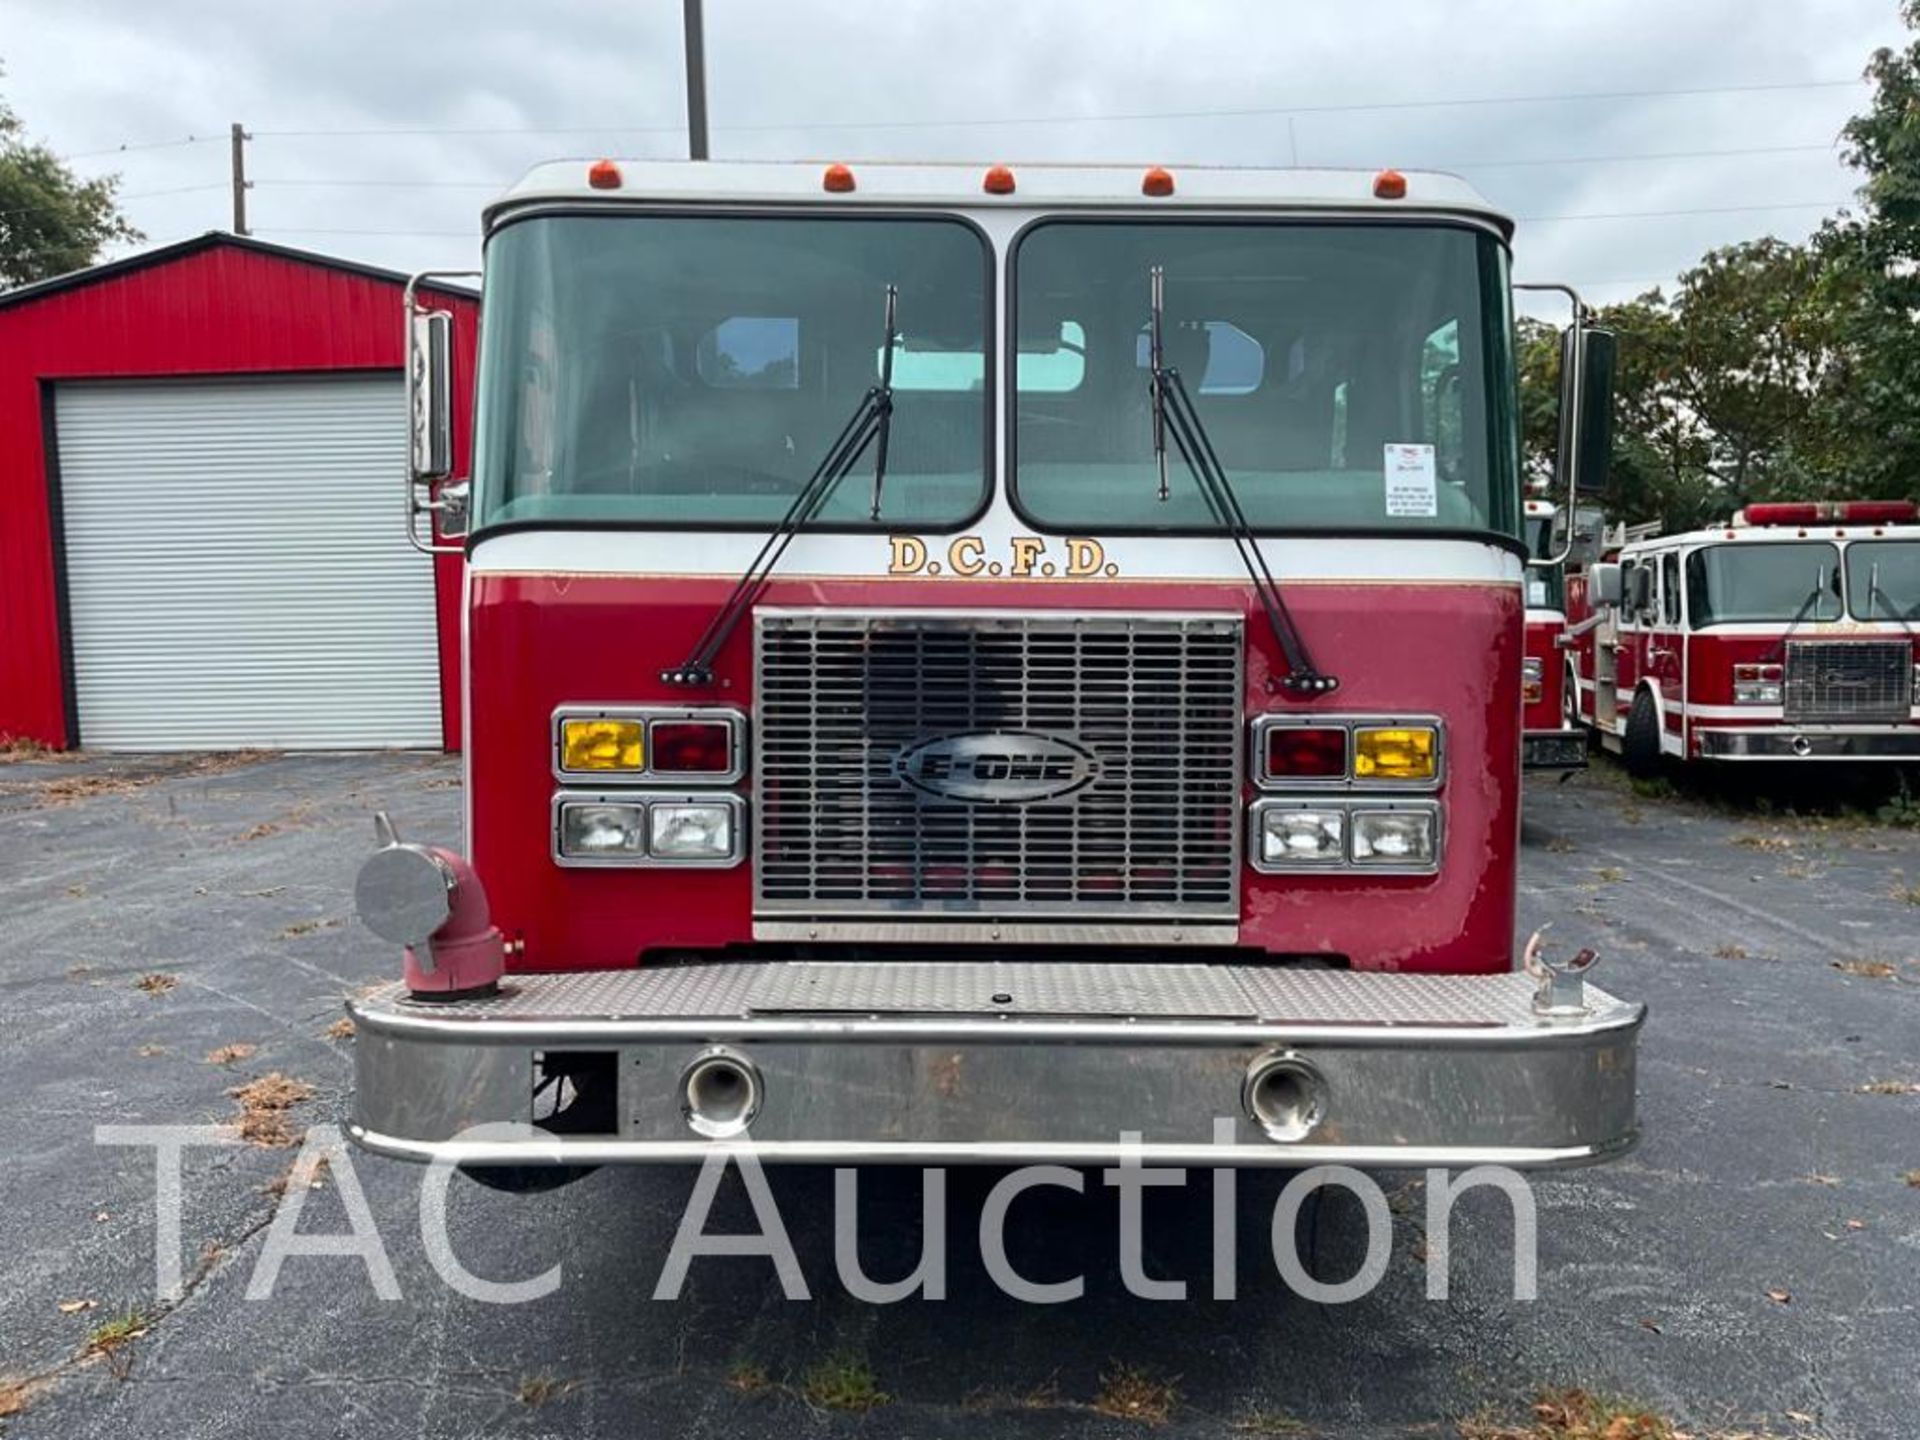 1997 E-One Fire Truck - Image 11 of 60